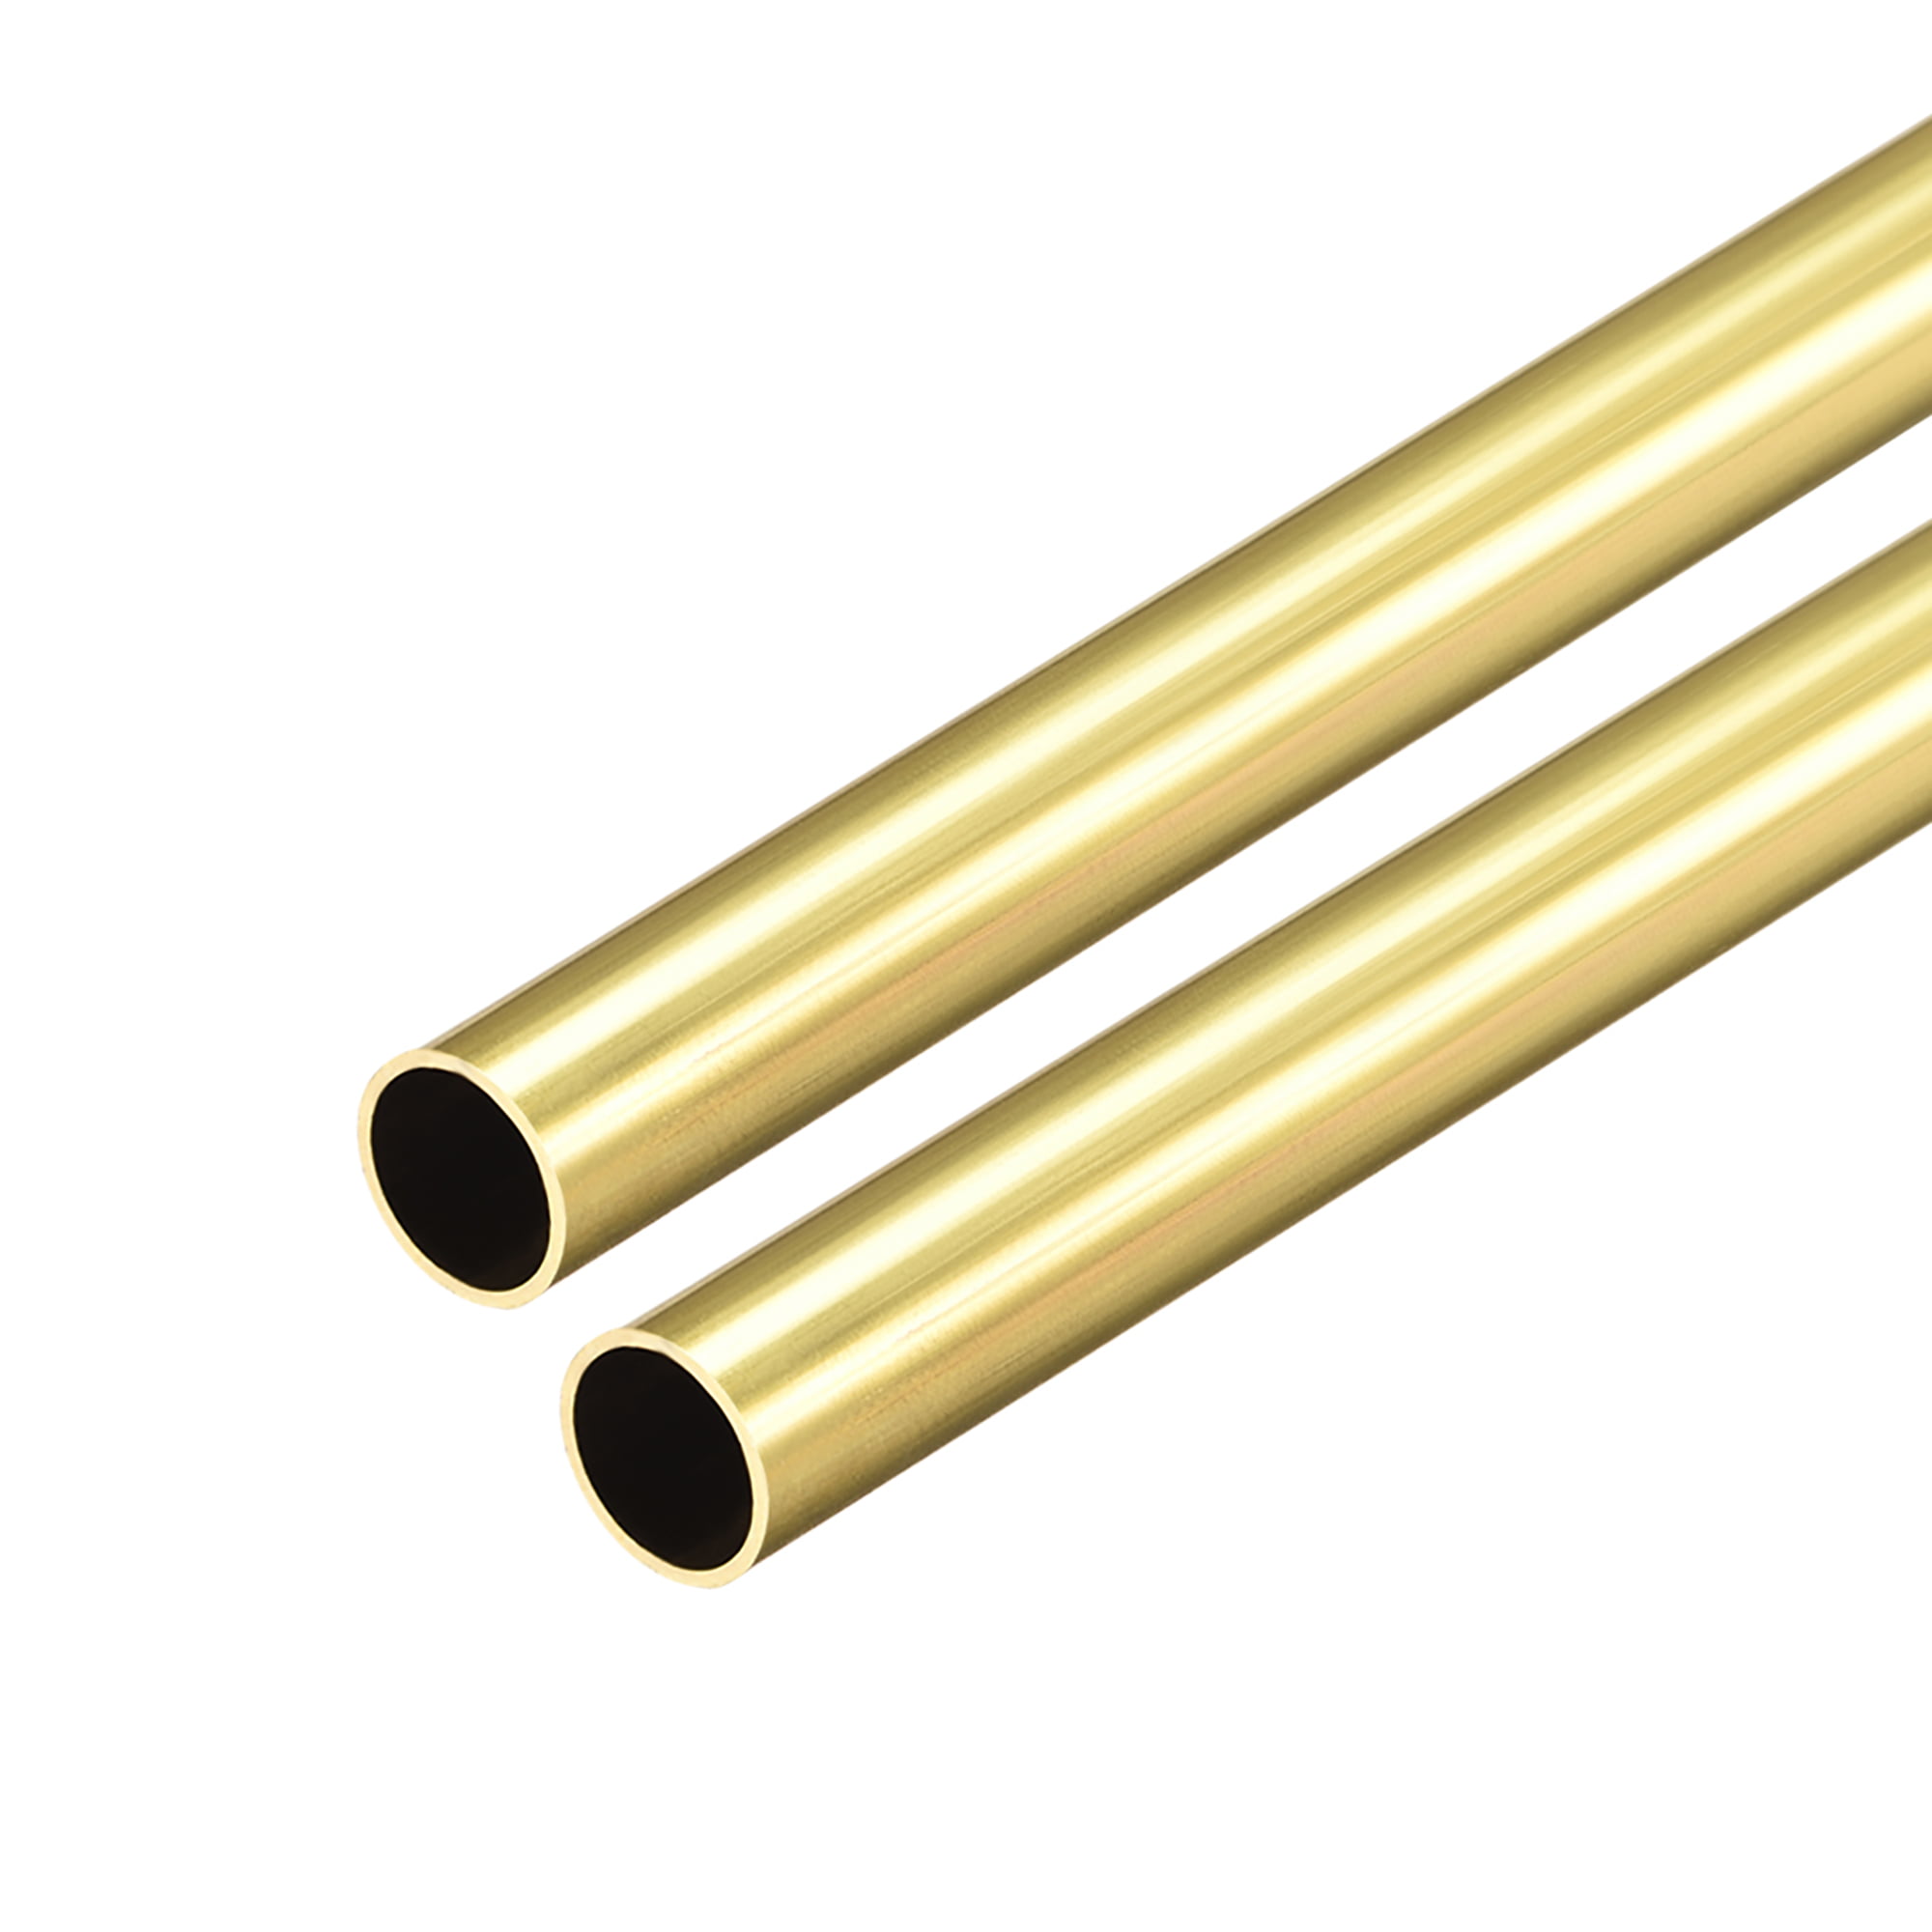 uxcell 8mm x 12mm x 500mm Brass Pipe Tube Round Bar Rod for RC Boat 